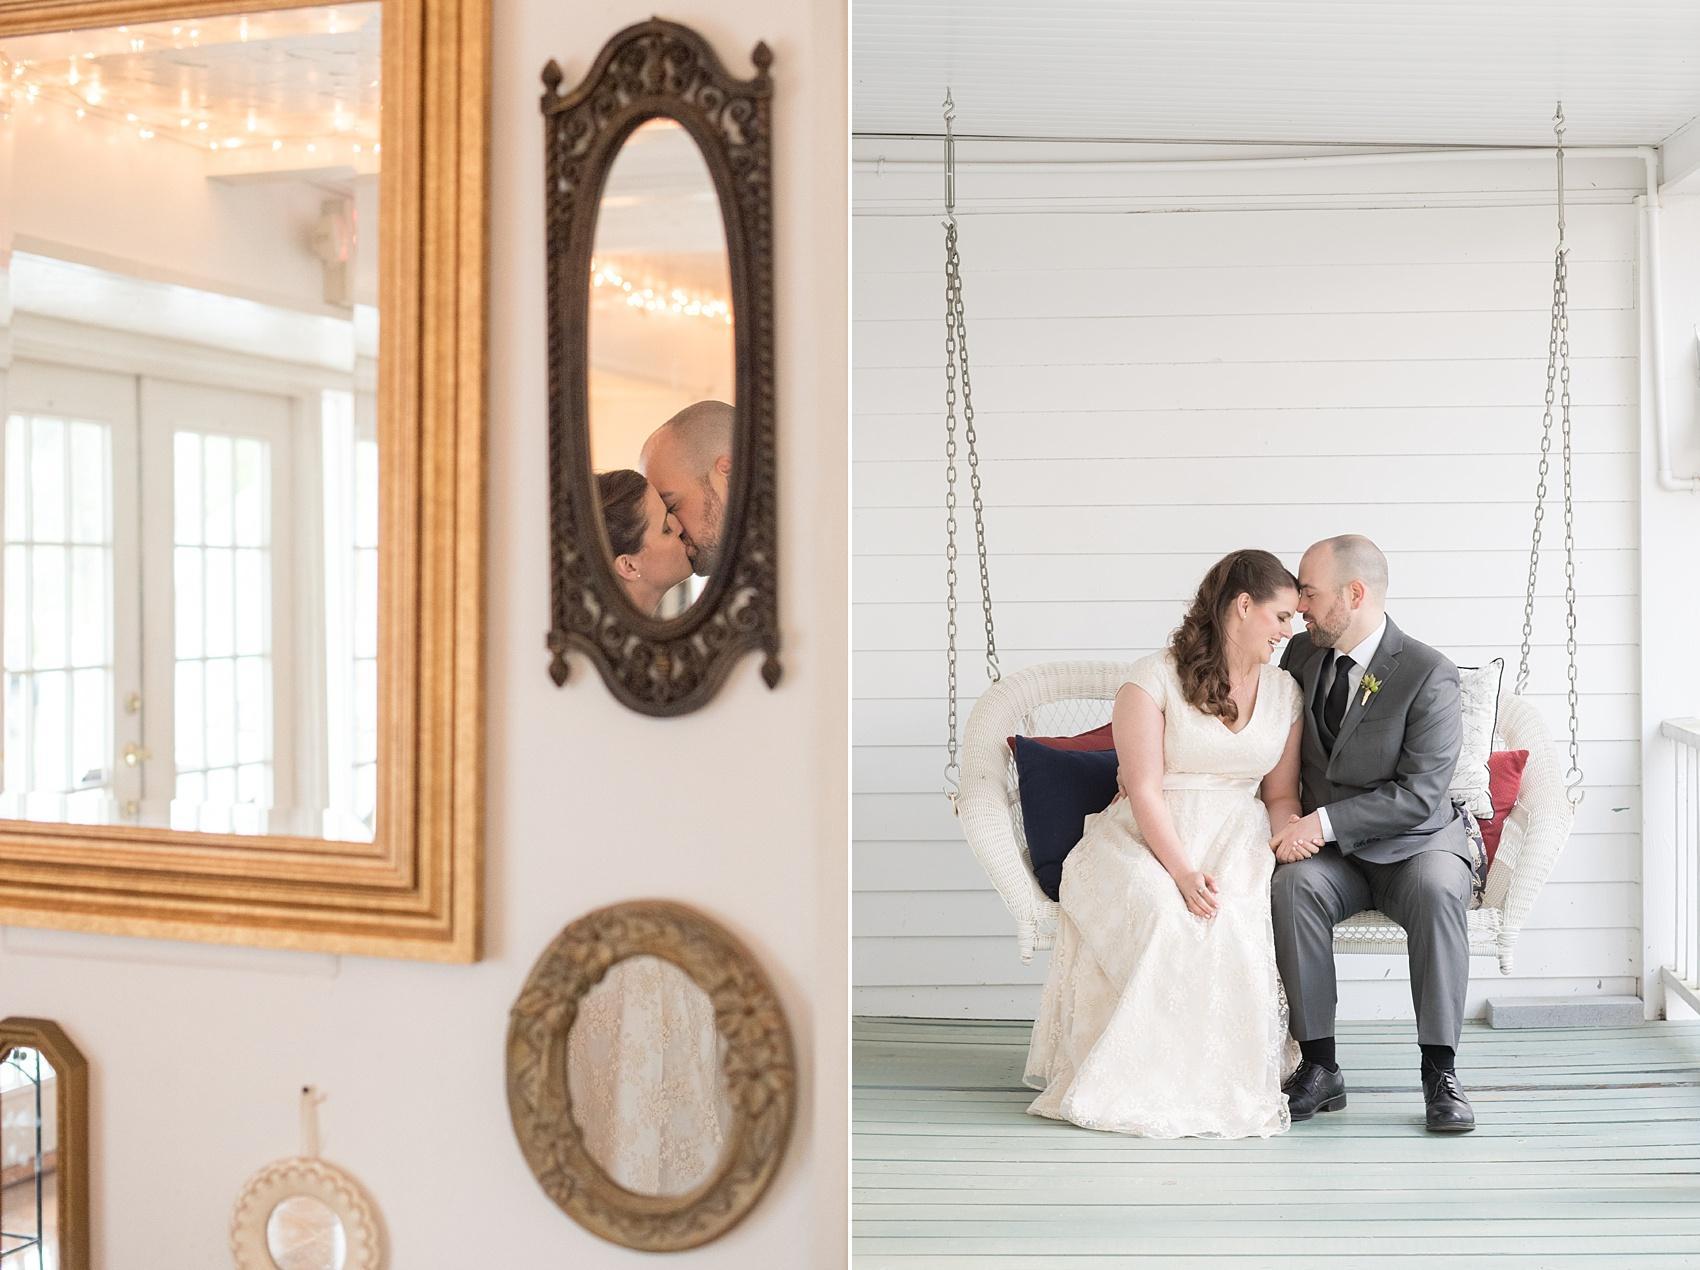 Bride and groom photos at a spring wedding at Four Oaks Manor in Atlanta. Images by Mikkel Paige Photography.